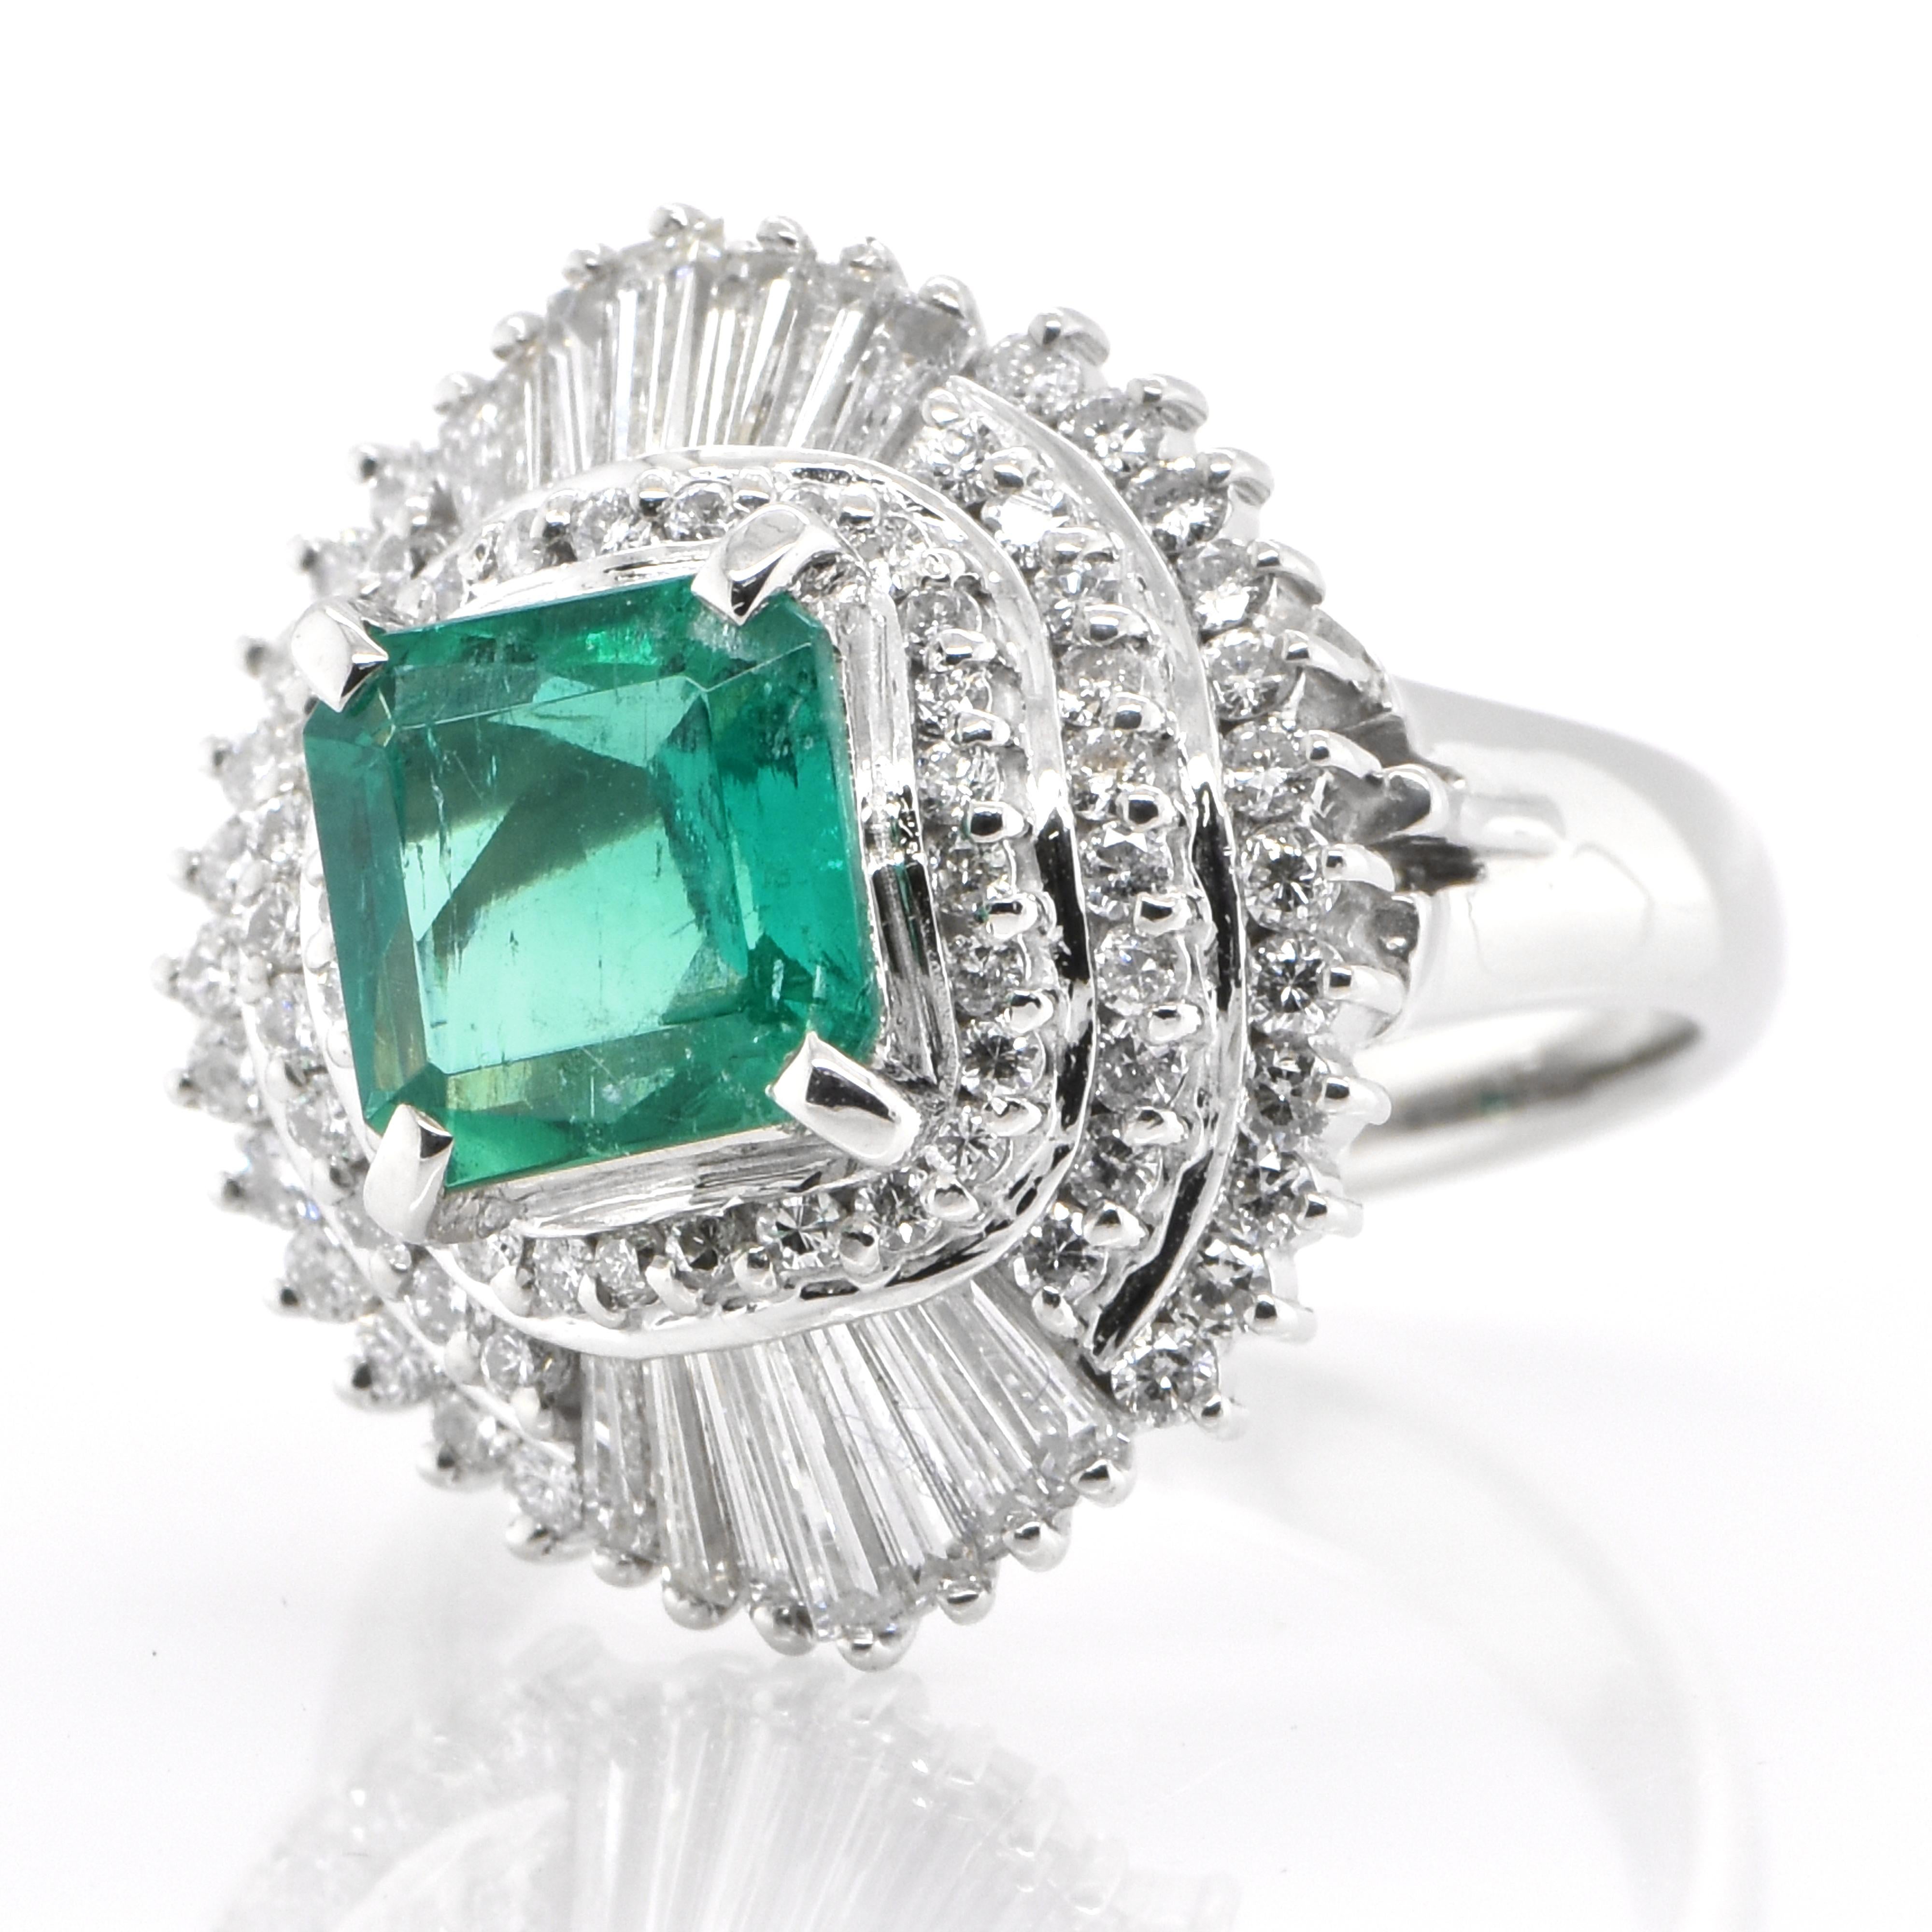 A stunning ring featuring a 1.60 Carat Natural Emerald and 1.05 Carats of Diamond Accents set in Platinum. People have admired emerald’s green for thousands of years. Emeralds have always been associated with the lushest landscapes and the richest